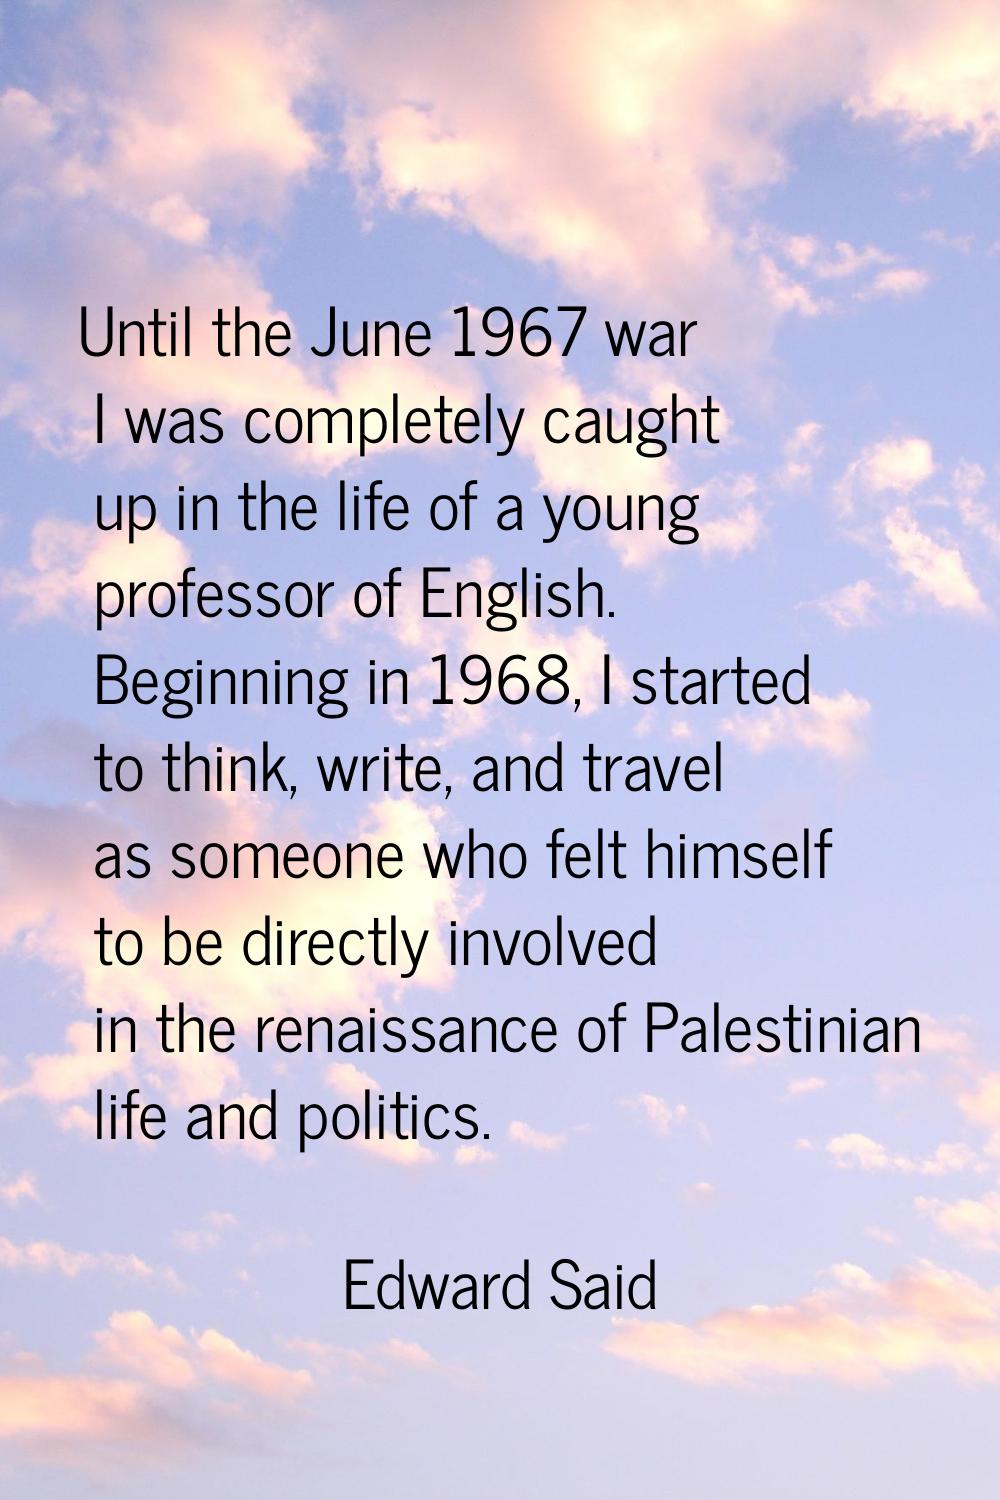 Until the June 1967 war I was completely caught up in the life of a young professor of English. Beg